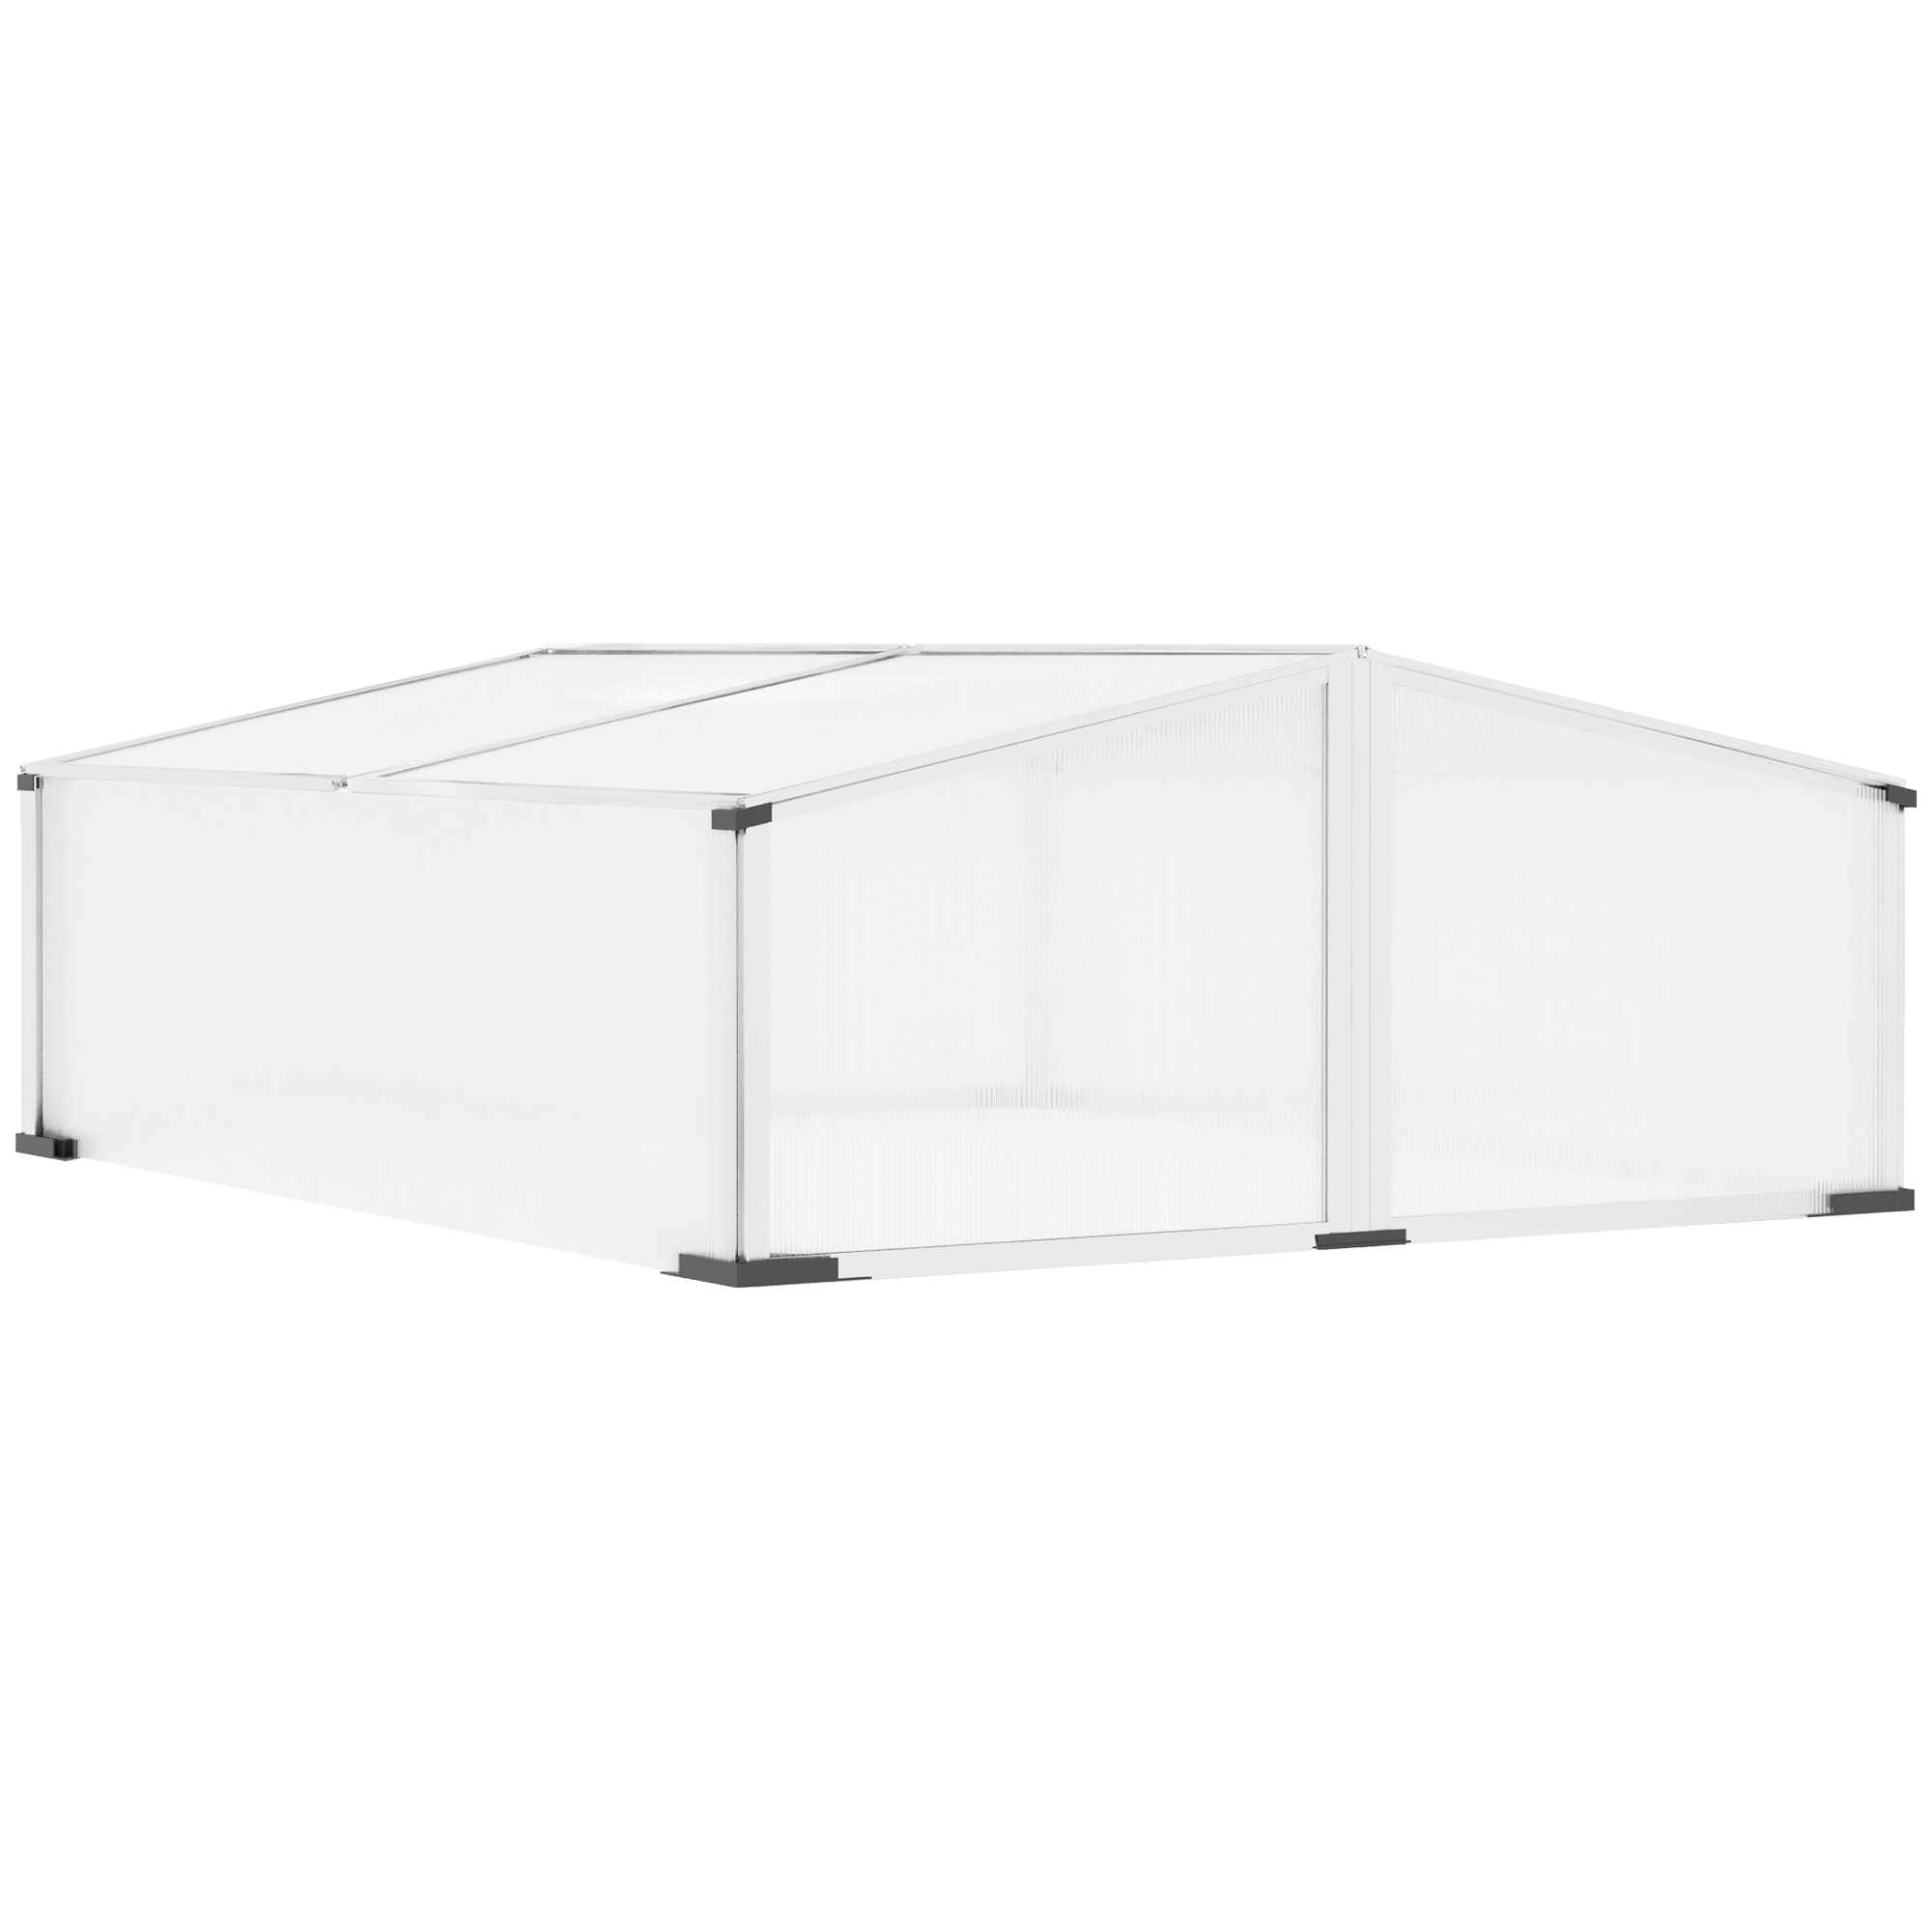 Outsunny Garden Greenhouse with Sunroof Polycarbonate 120x100x31-41cm - Διάφανο